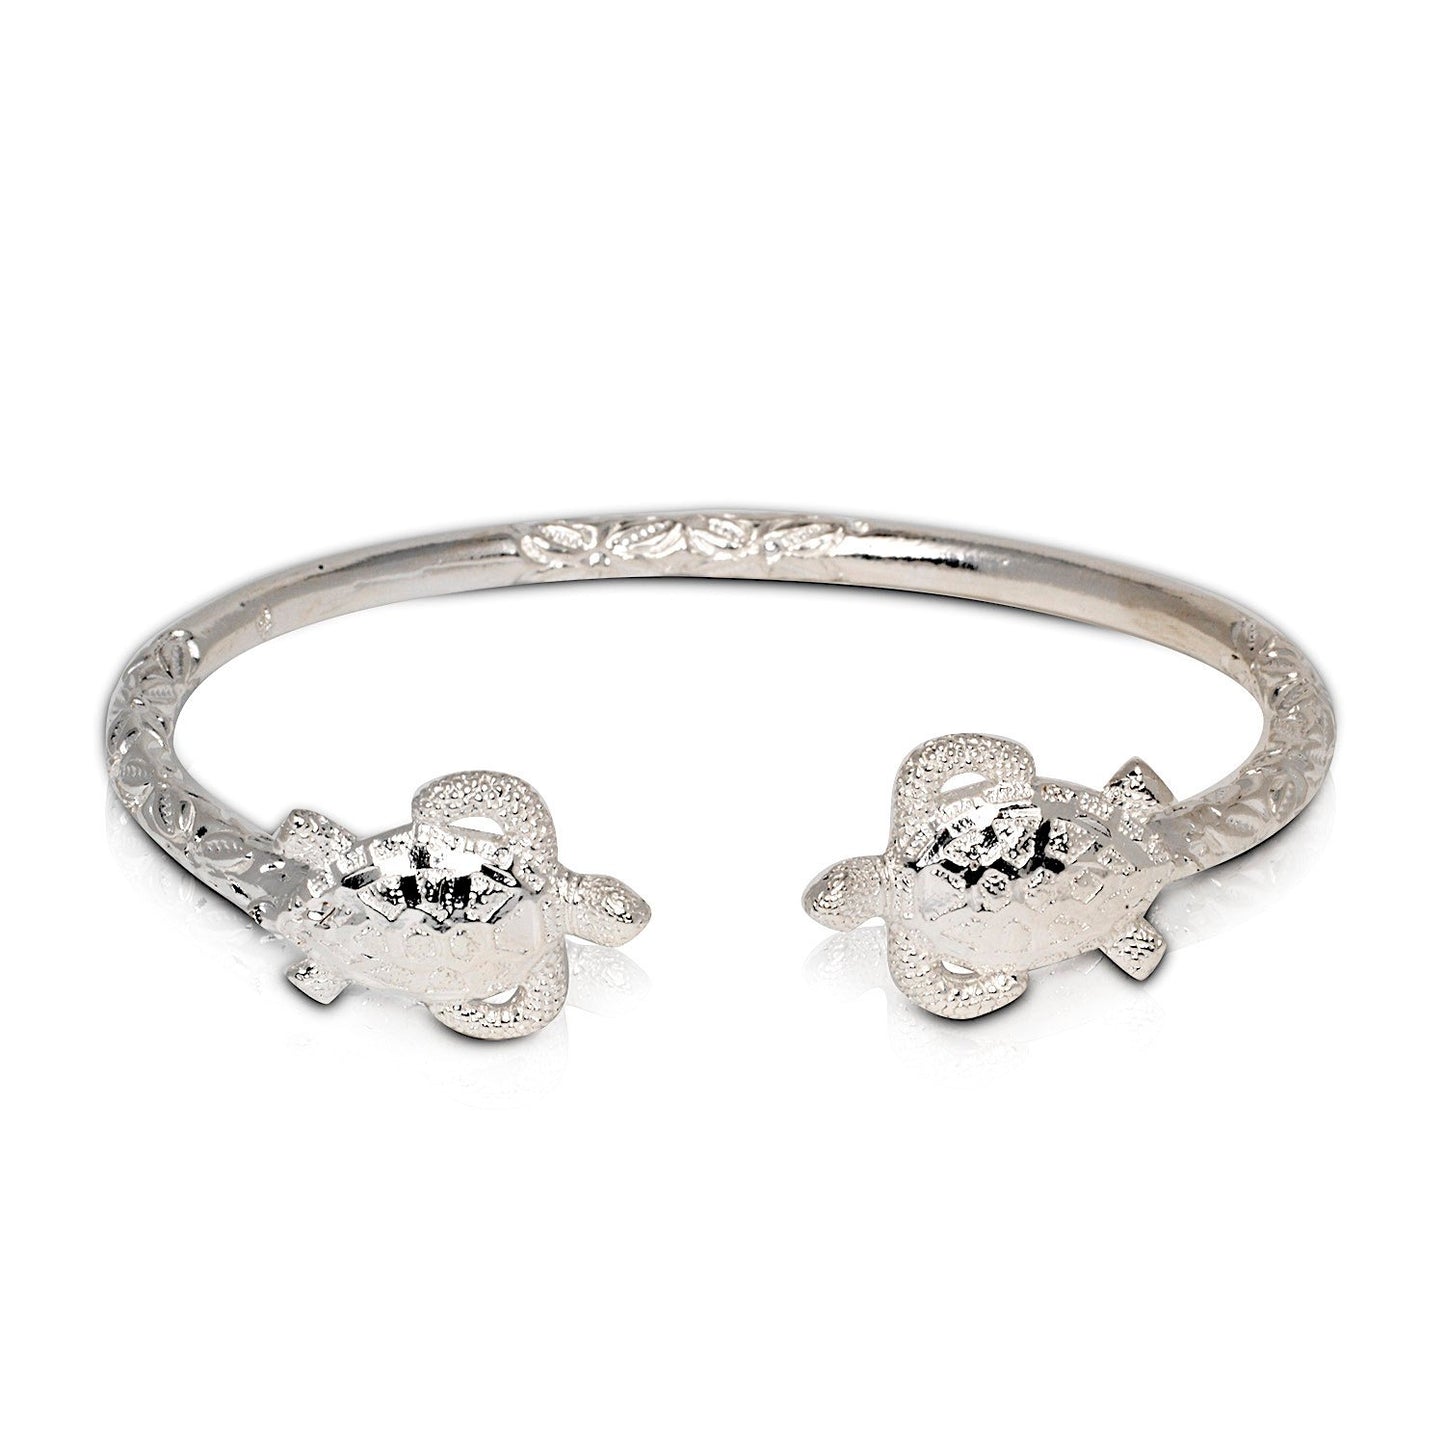 Solid .925 Sterling Silver Sea Turtle Bangle (Made in USA) - Betterjewelry